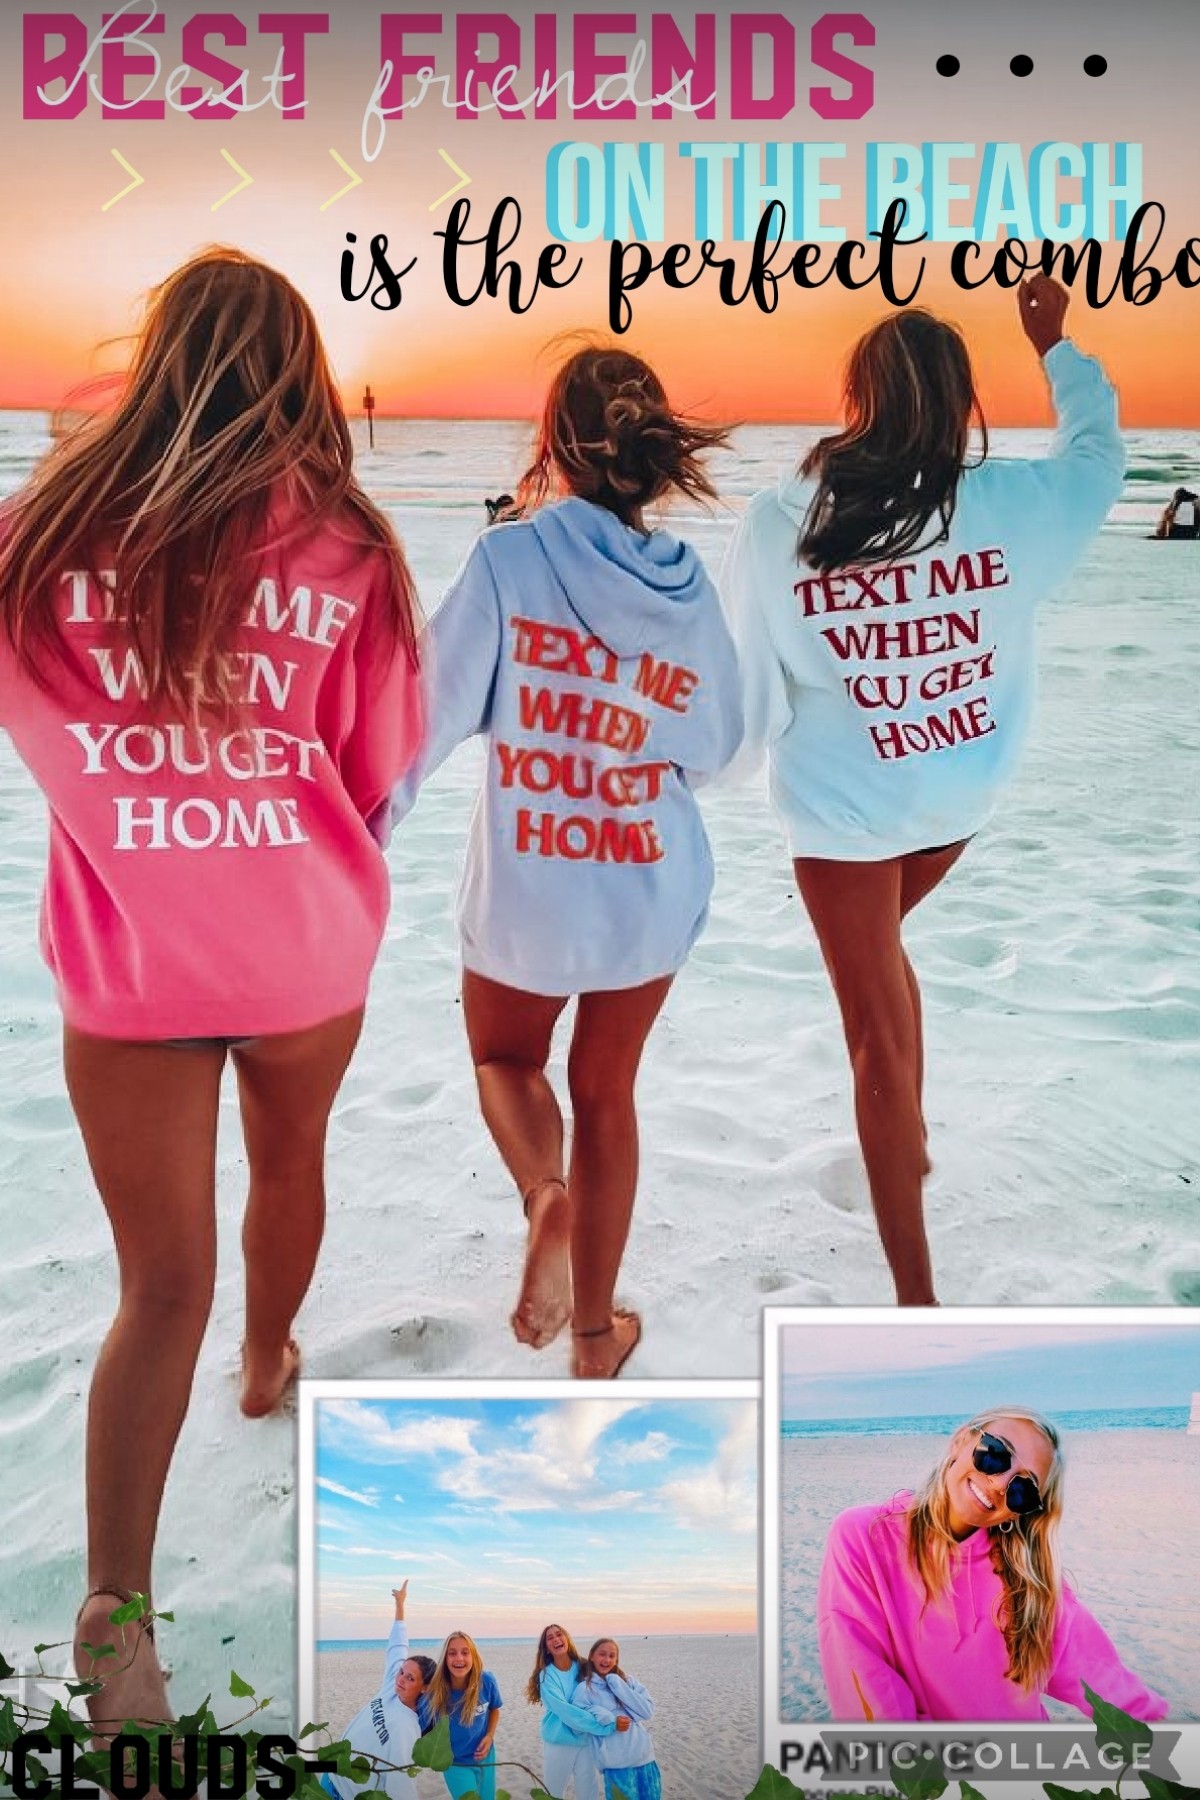              ❤️tap❤️

   ✨️ heyy! so this is another best friend beach preppy collage, hope u like this! 💕 hru guys? 🙃
   P.S the quote was made by me 😂😅
   QOTD: Favourite Colour(s)
    AOTD: Pink, purple and blue! 😍